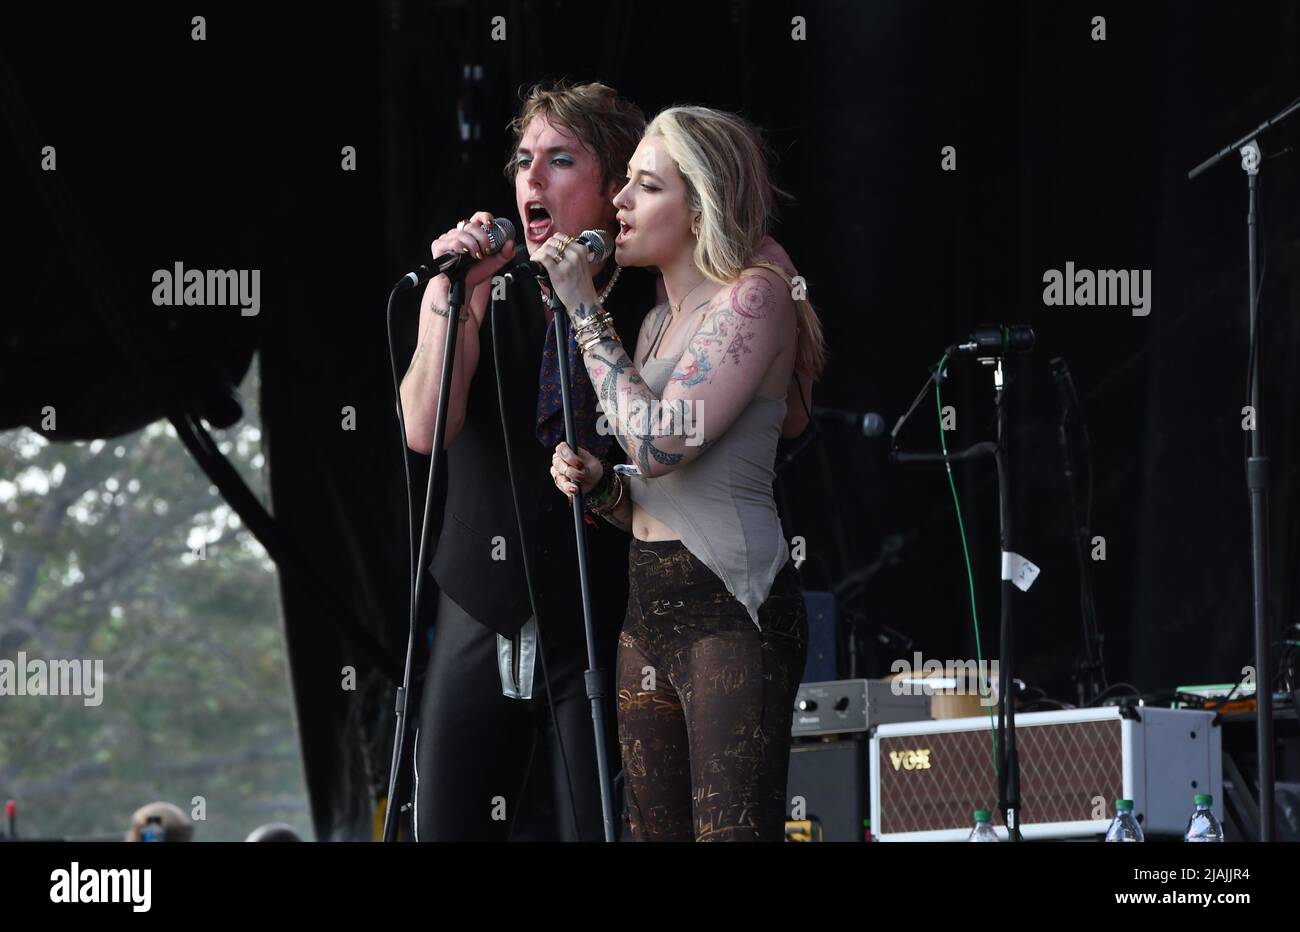 Lead singer Luke Spiller and special guest Paris Jackson are shown performing on stage during a live concert appearance The Struts during the Boston Calling music festival held in Allston, Massachusetts on May 27, 2022. Stock Photo